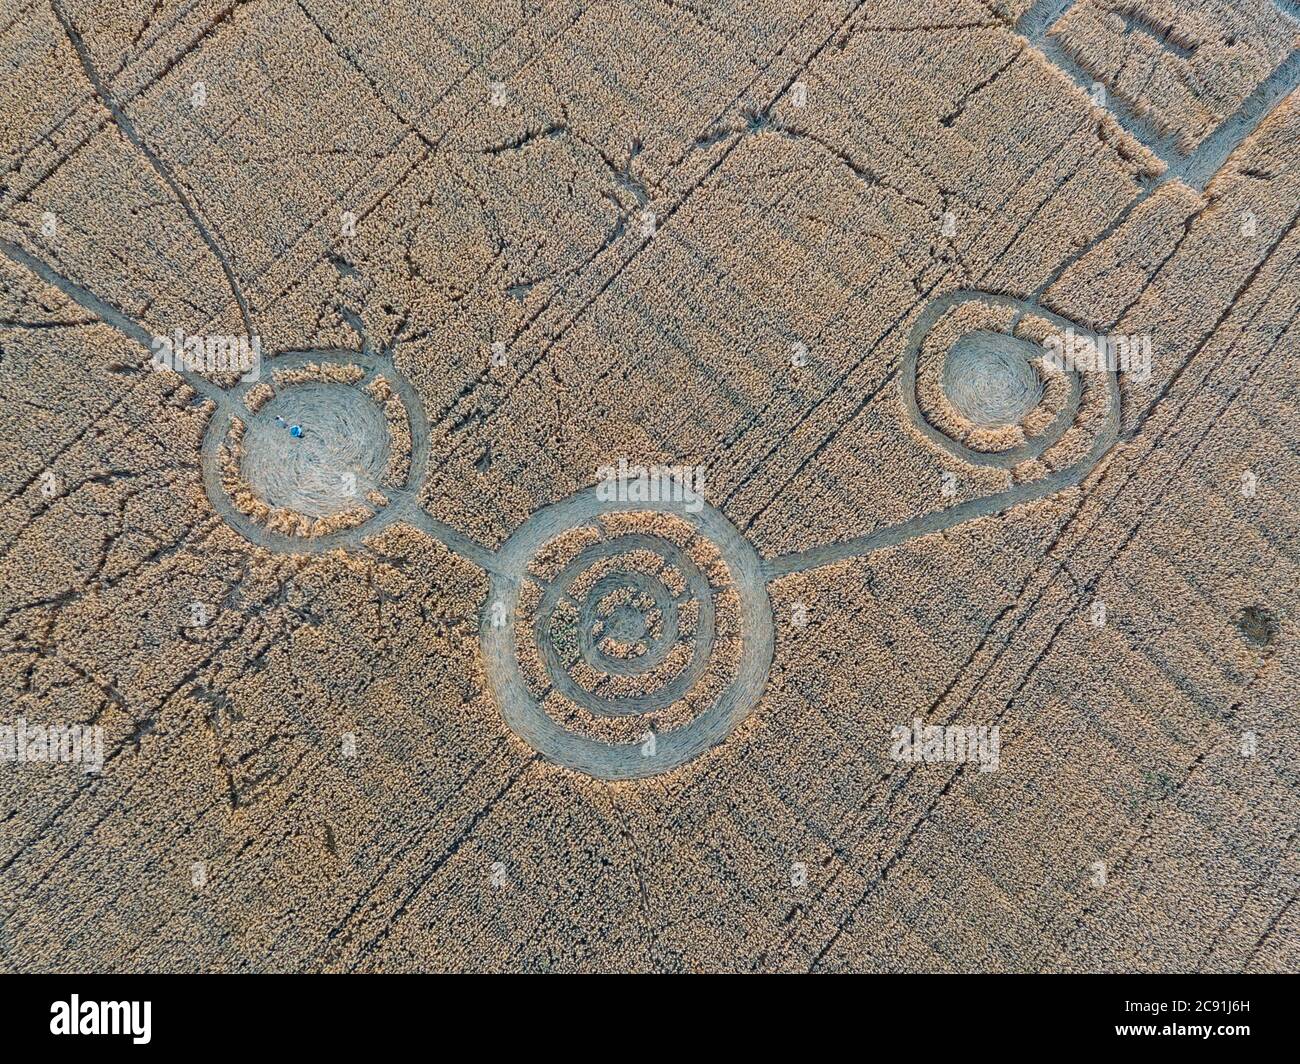 Mysterious crop circle in oat field near the city, aerial view Stock Photo